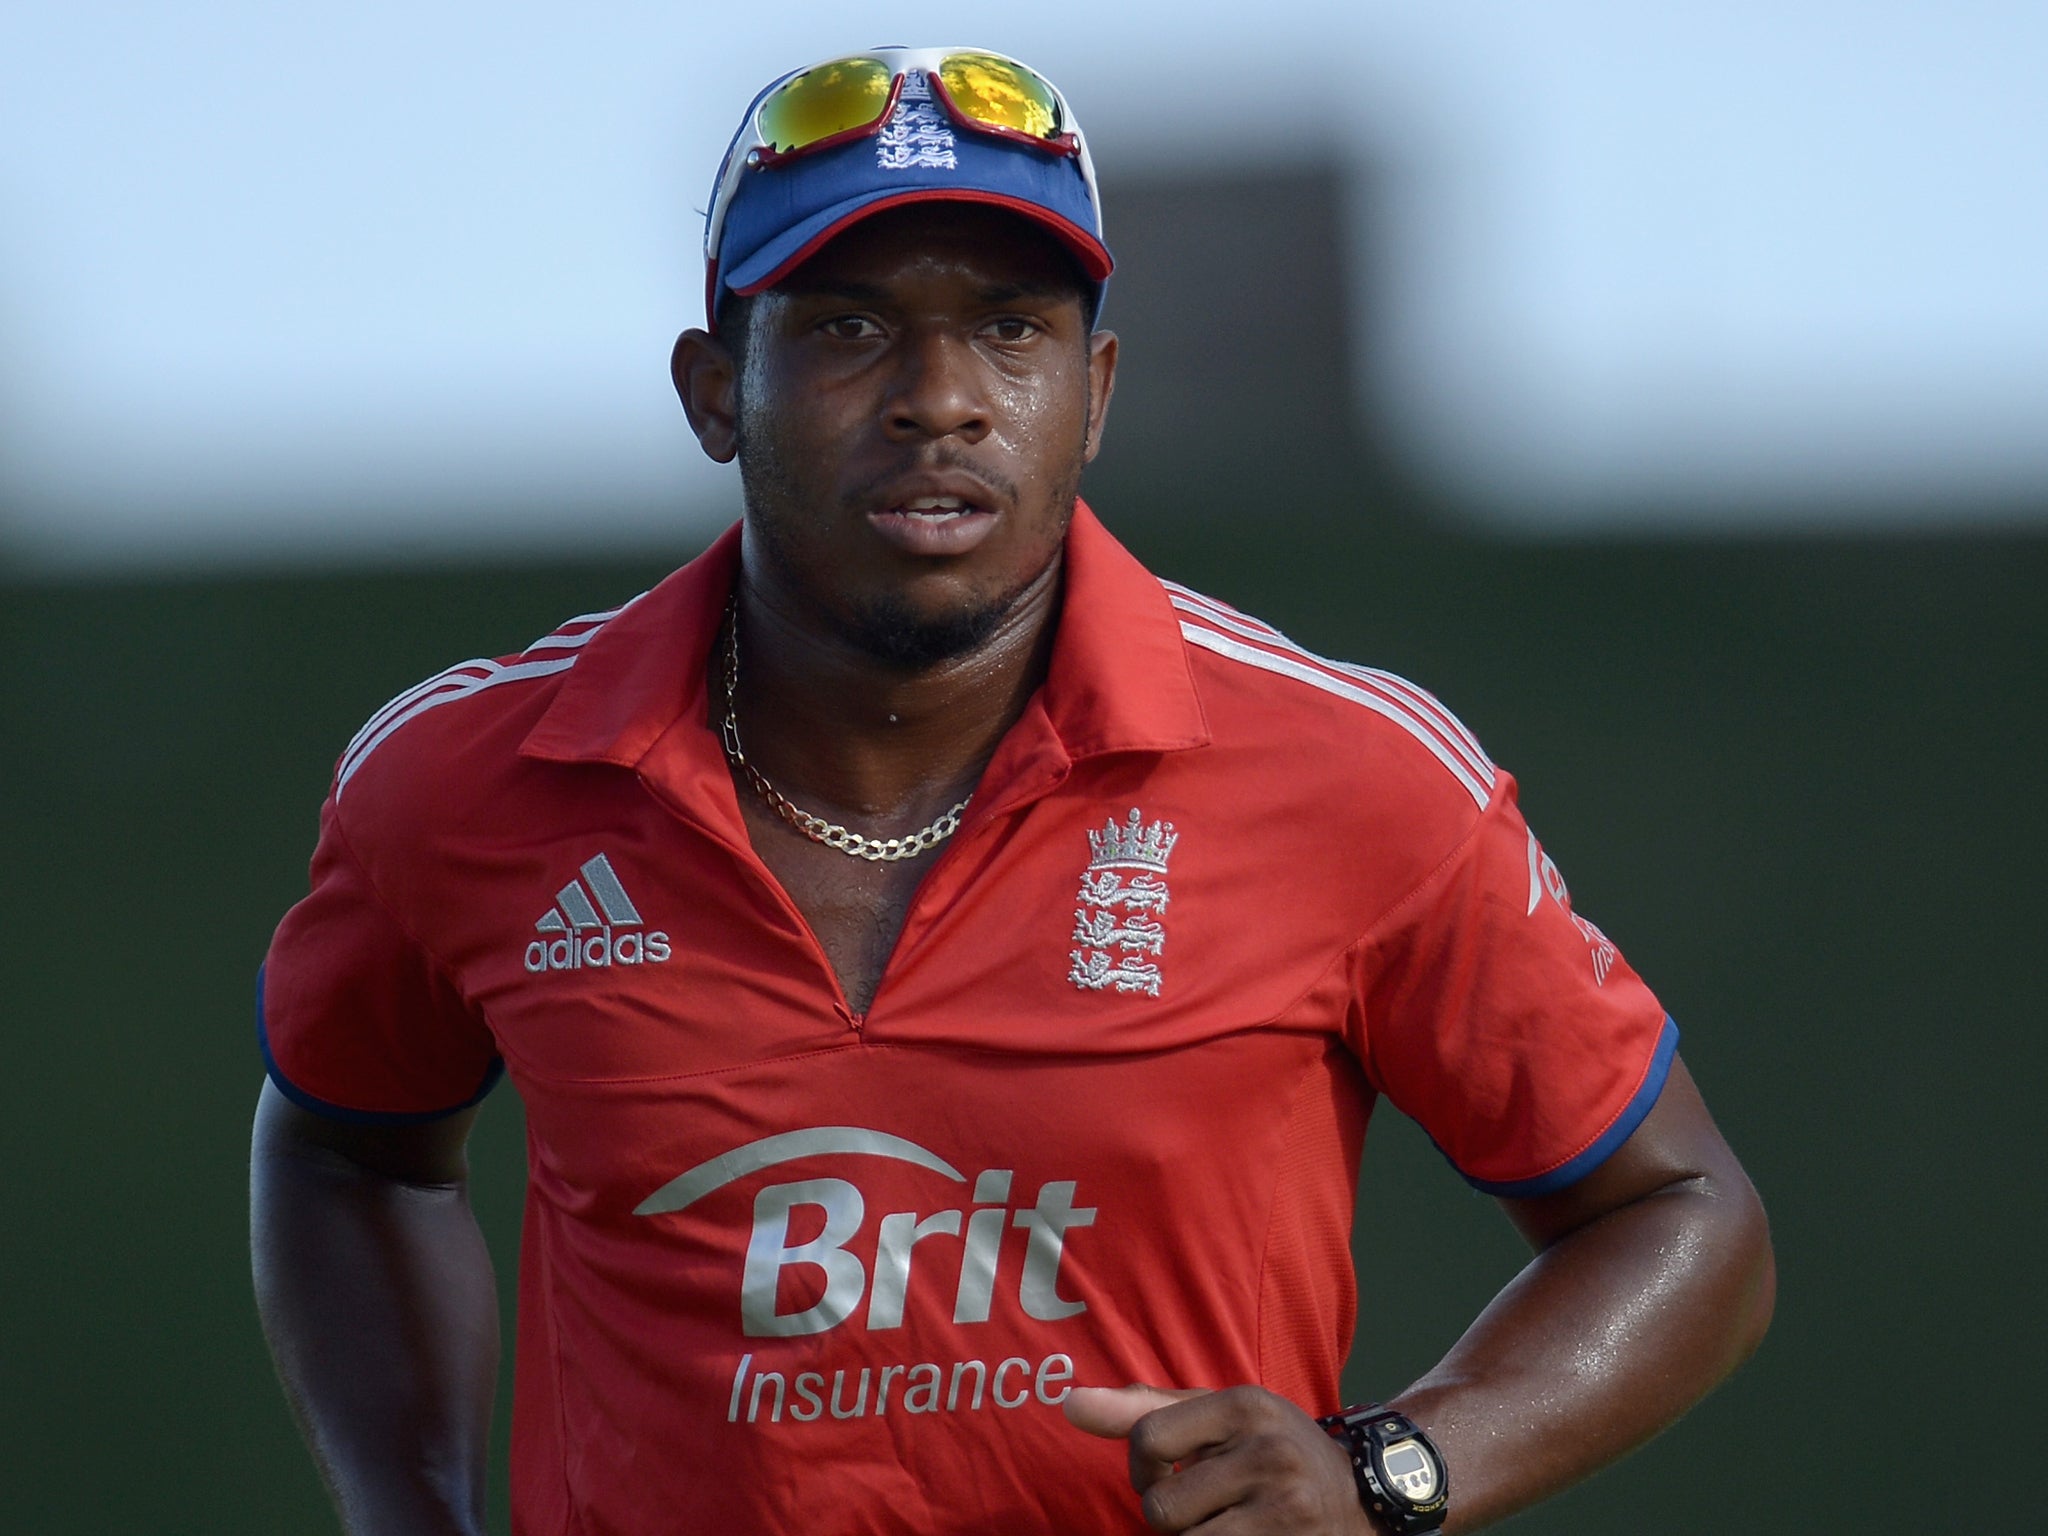 Chris Jordan is hoping to impress for England in his native country of Barbados on the tour of the West Indies